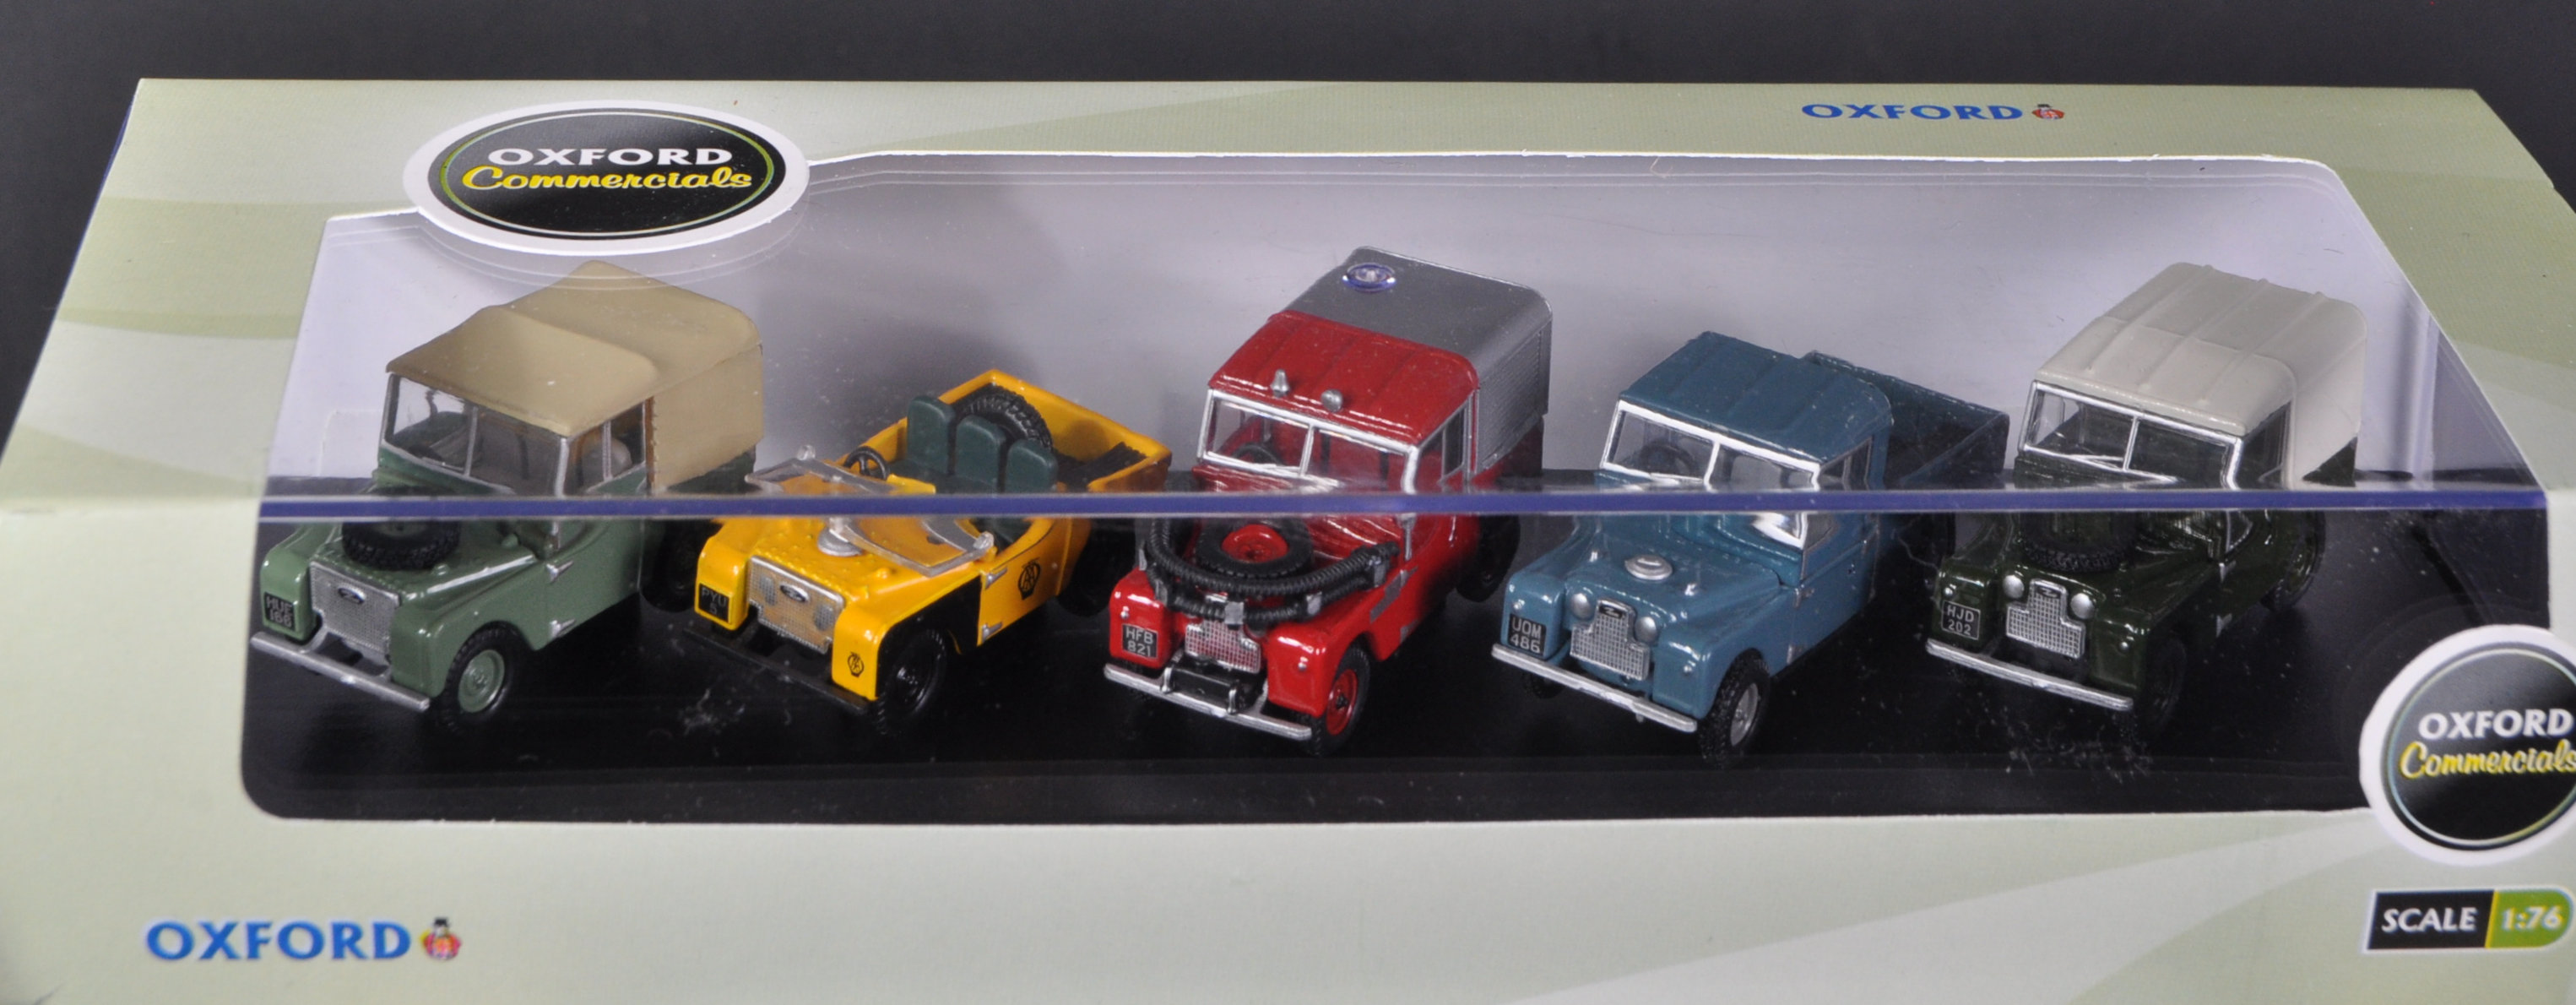 COLLECTION OF ASSORTED 1/76 SCALE OXFORD DIECAST MODELS - Image 2 of 8